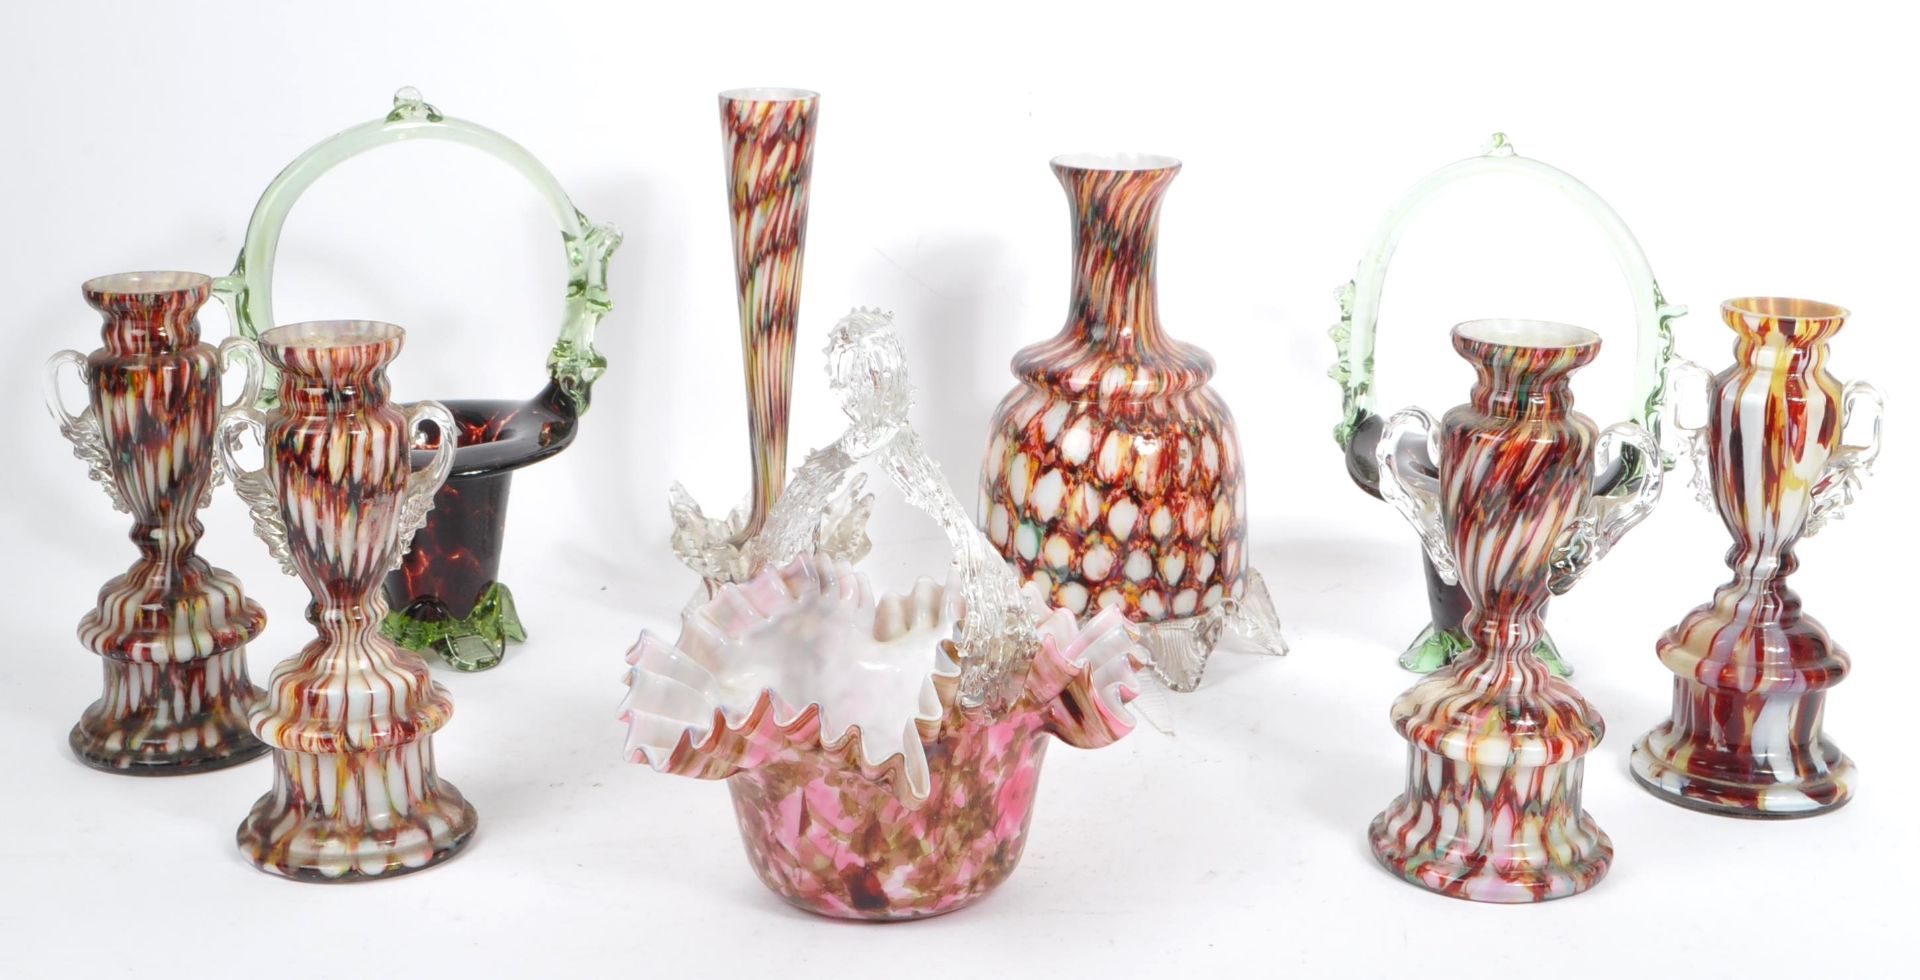 COLLECTION OF EARLY 20TH CENTURY CZECH STUDIO GLASS